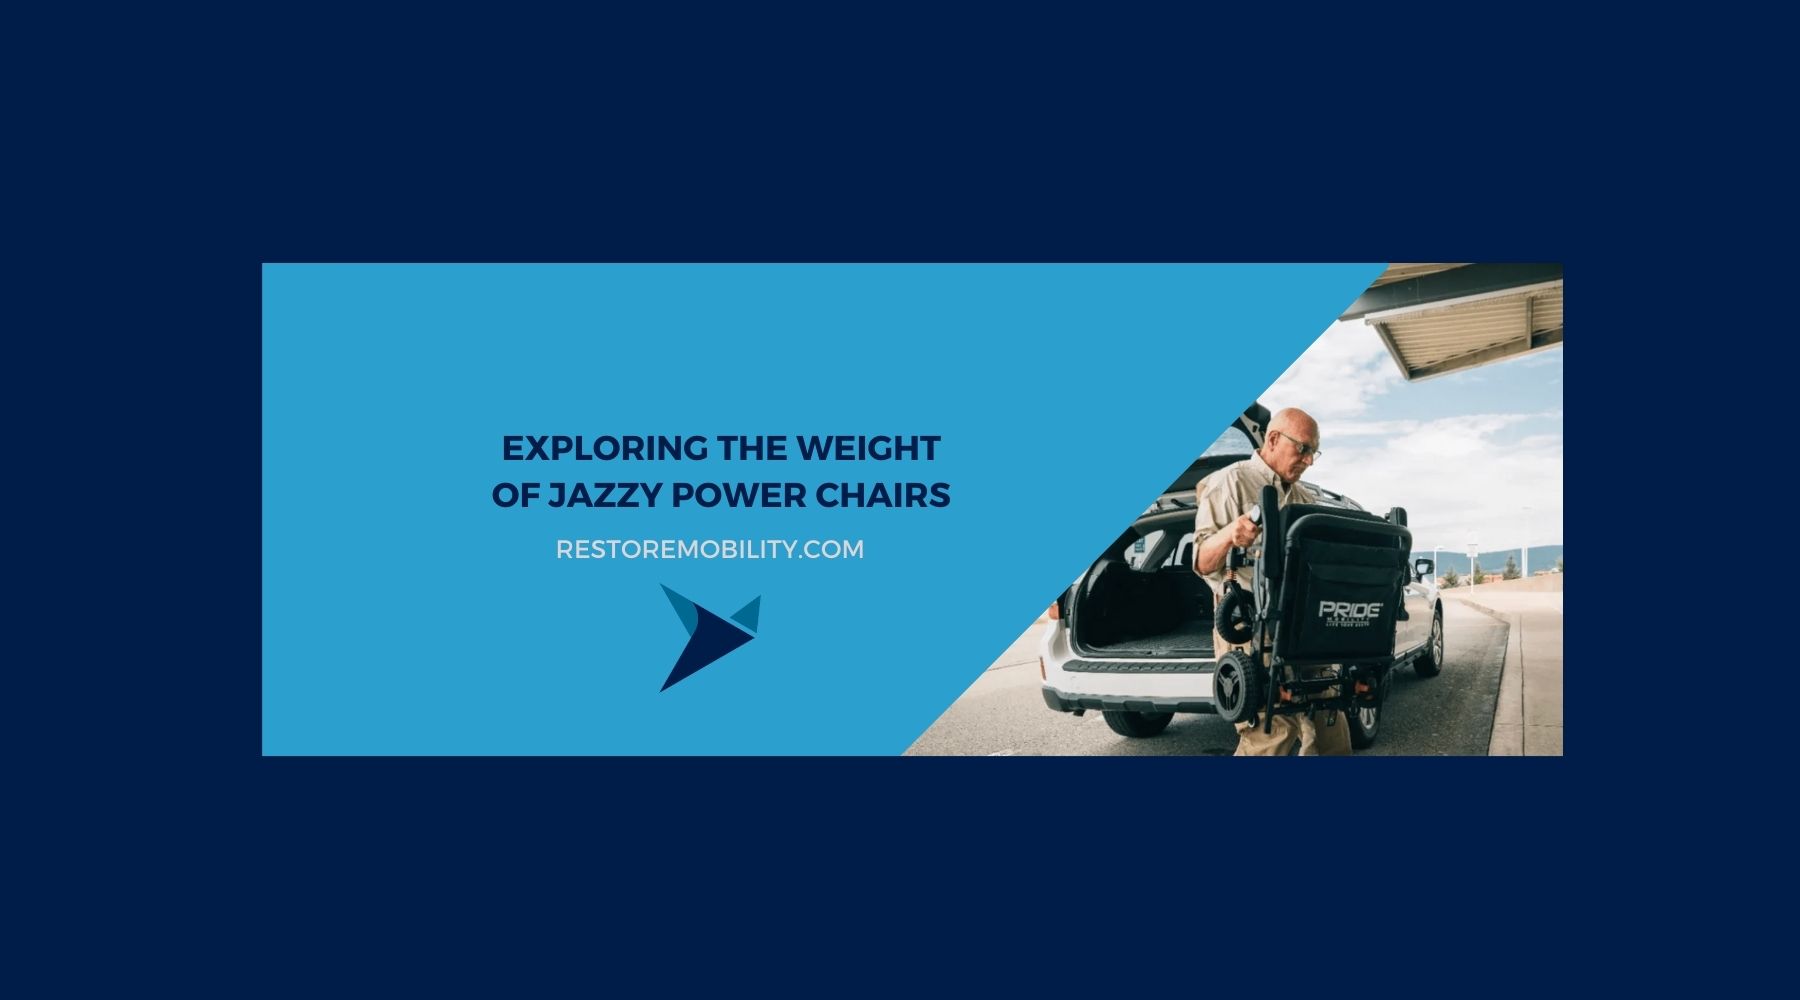 Exploring the Weight of Jazzy Power Chairs